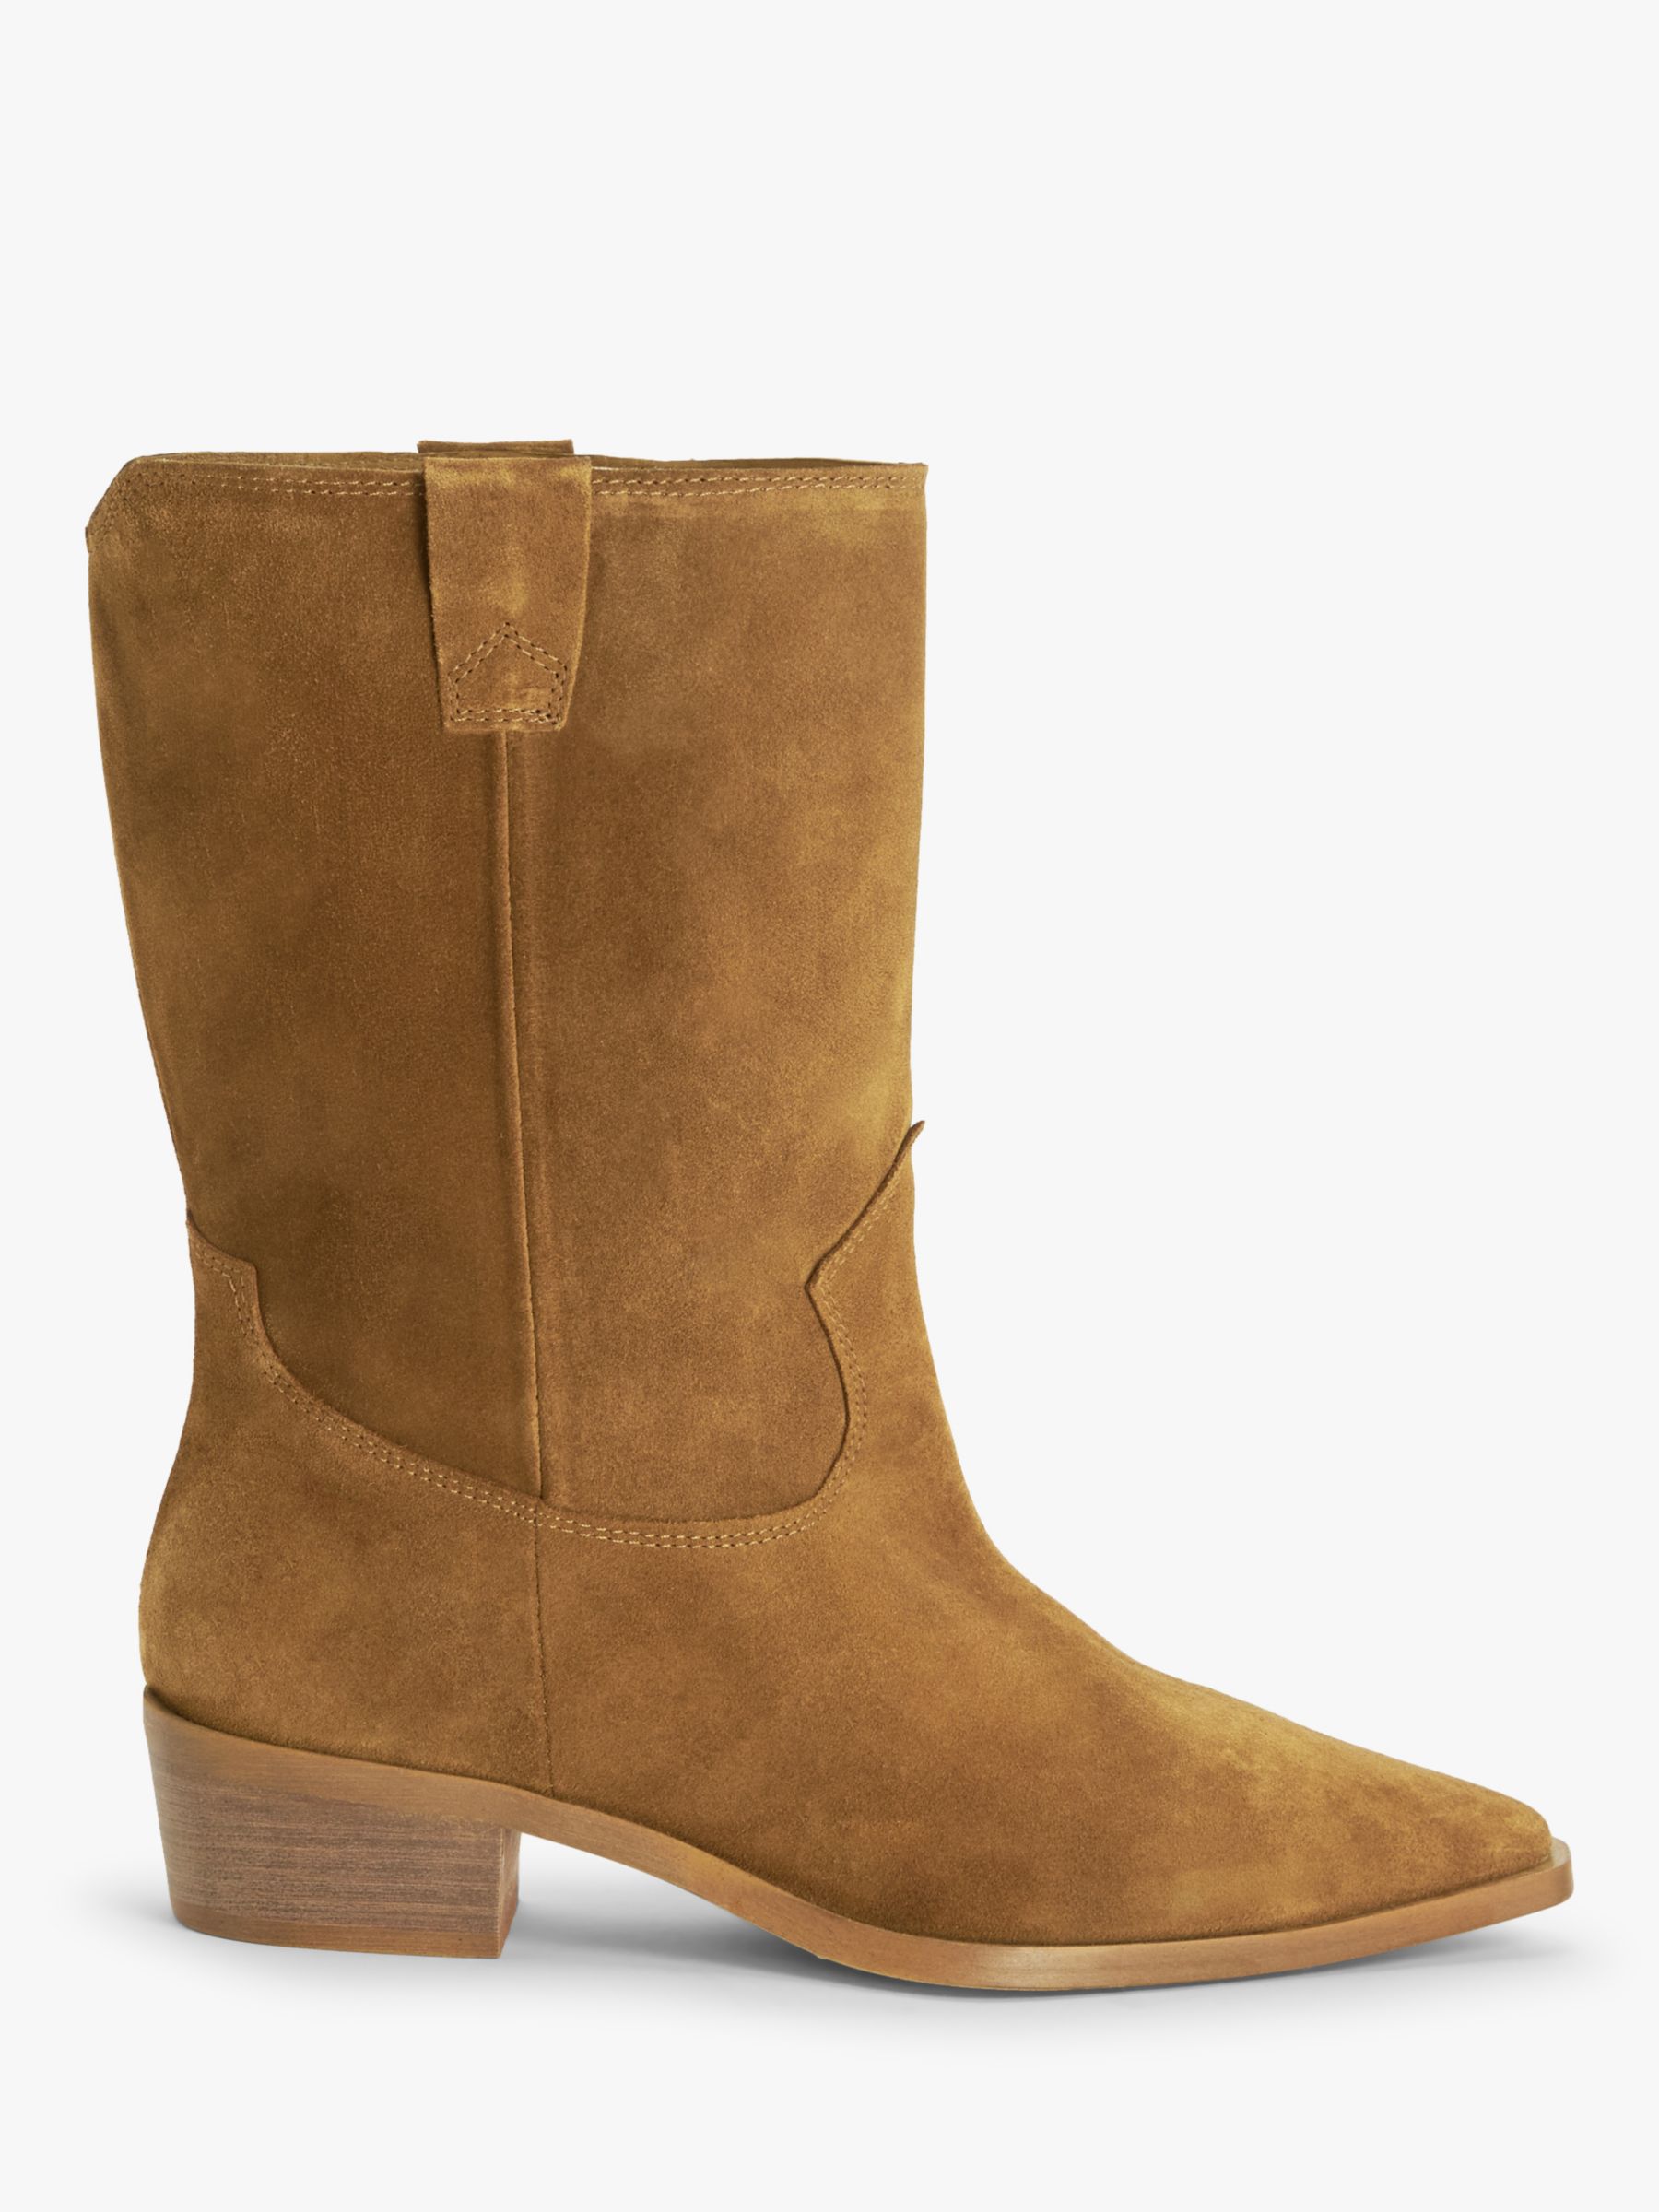 AND/OR Petra Suede Western Summer Boots, Tan, 7